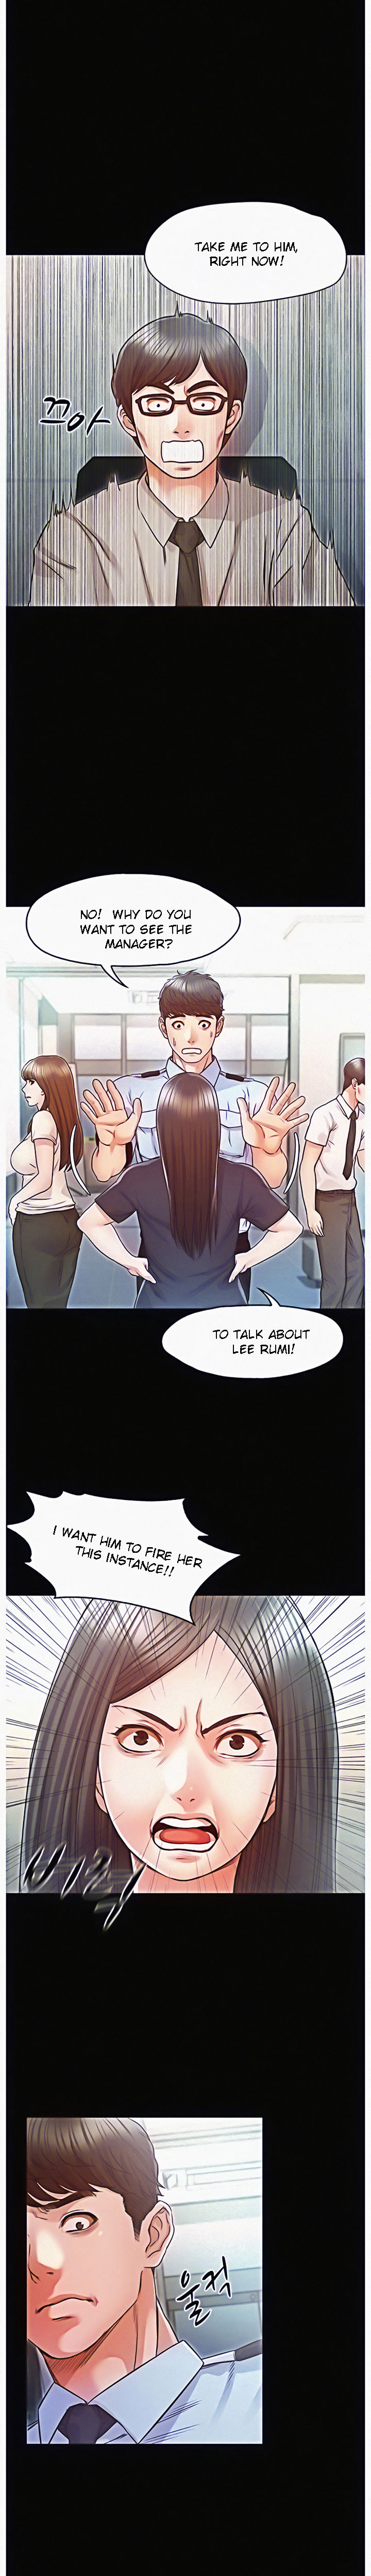 Who Did You Do With? - Chapter 15 Page 23